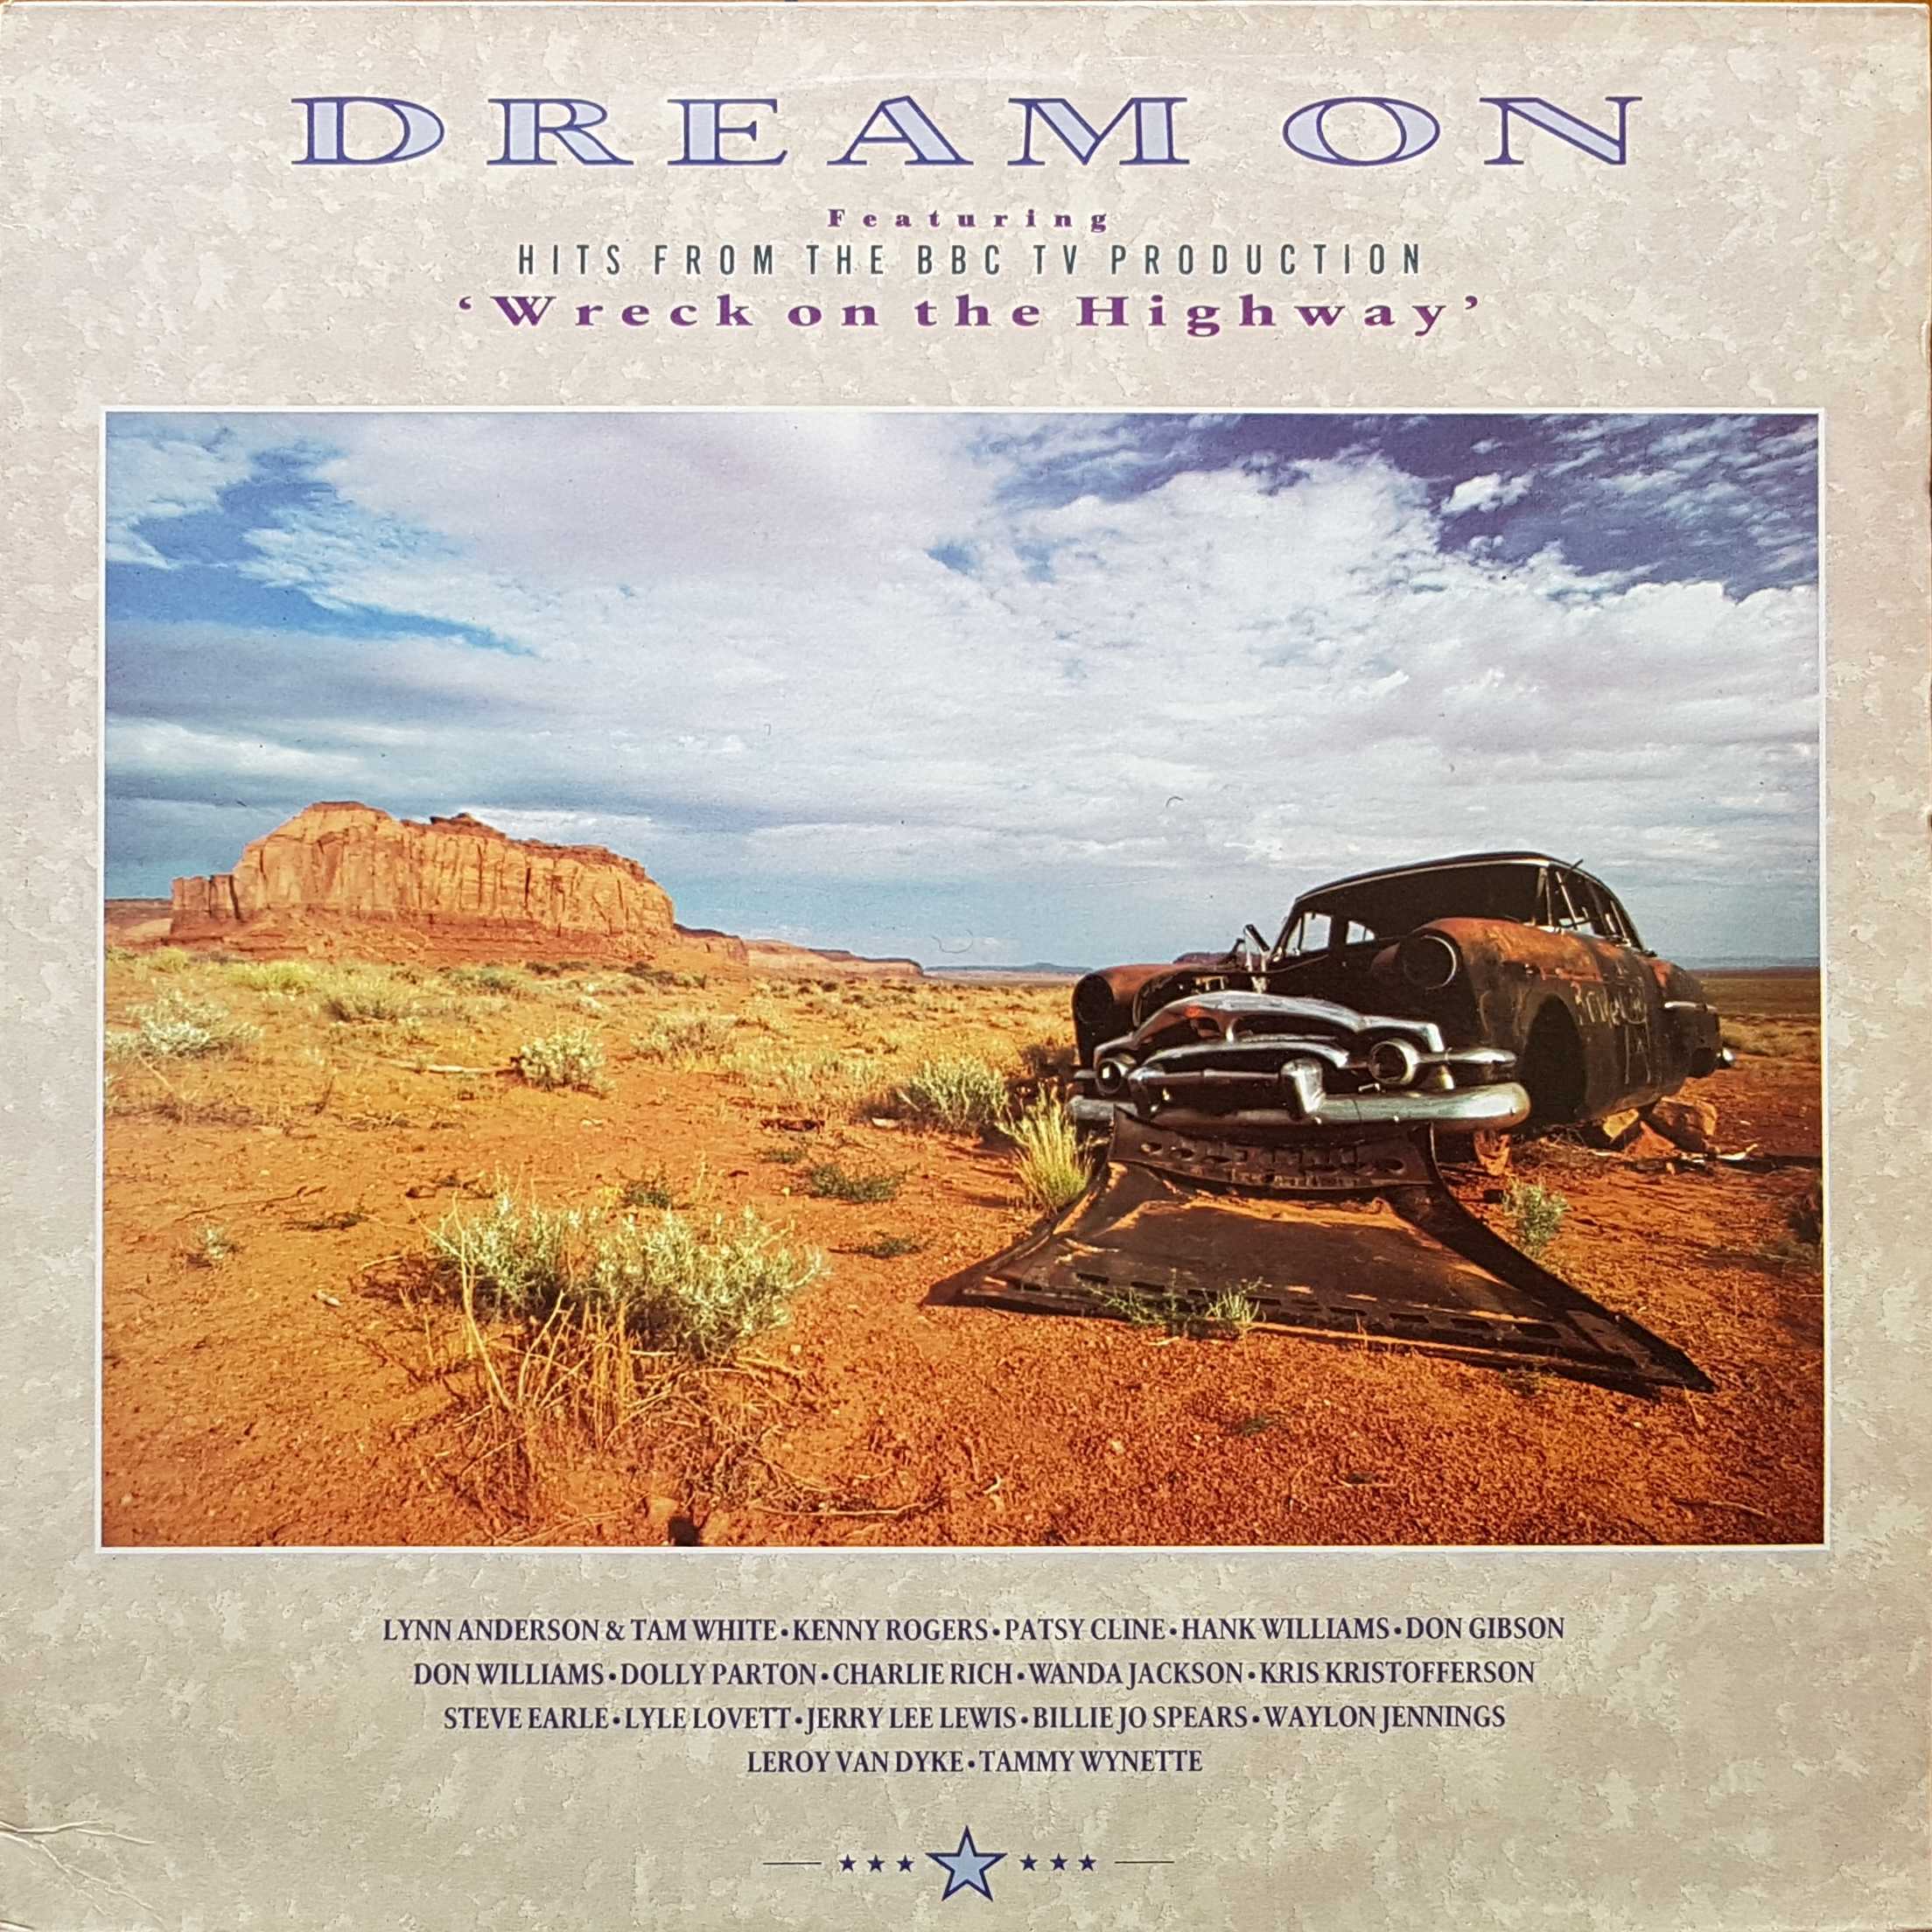 Picture of REB 769 Dream on (Wreck on the highway) by artist Various from the BBC albums - Records and Tapes library